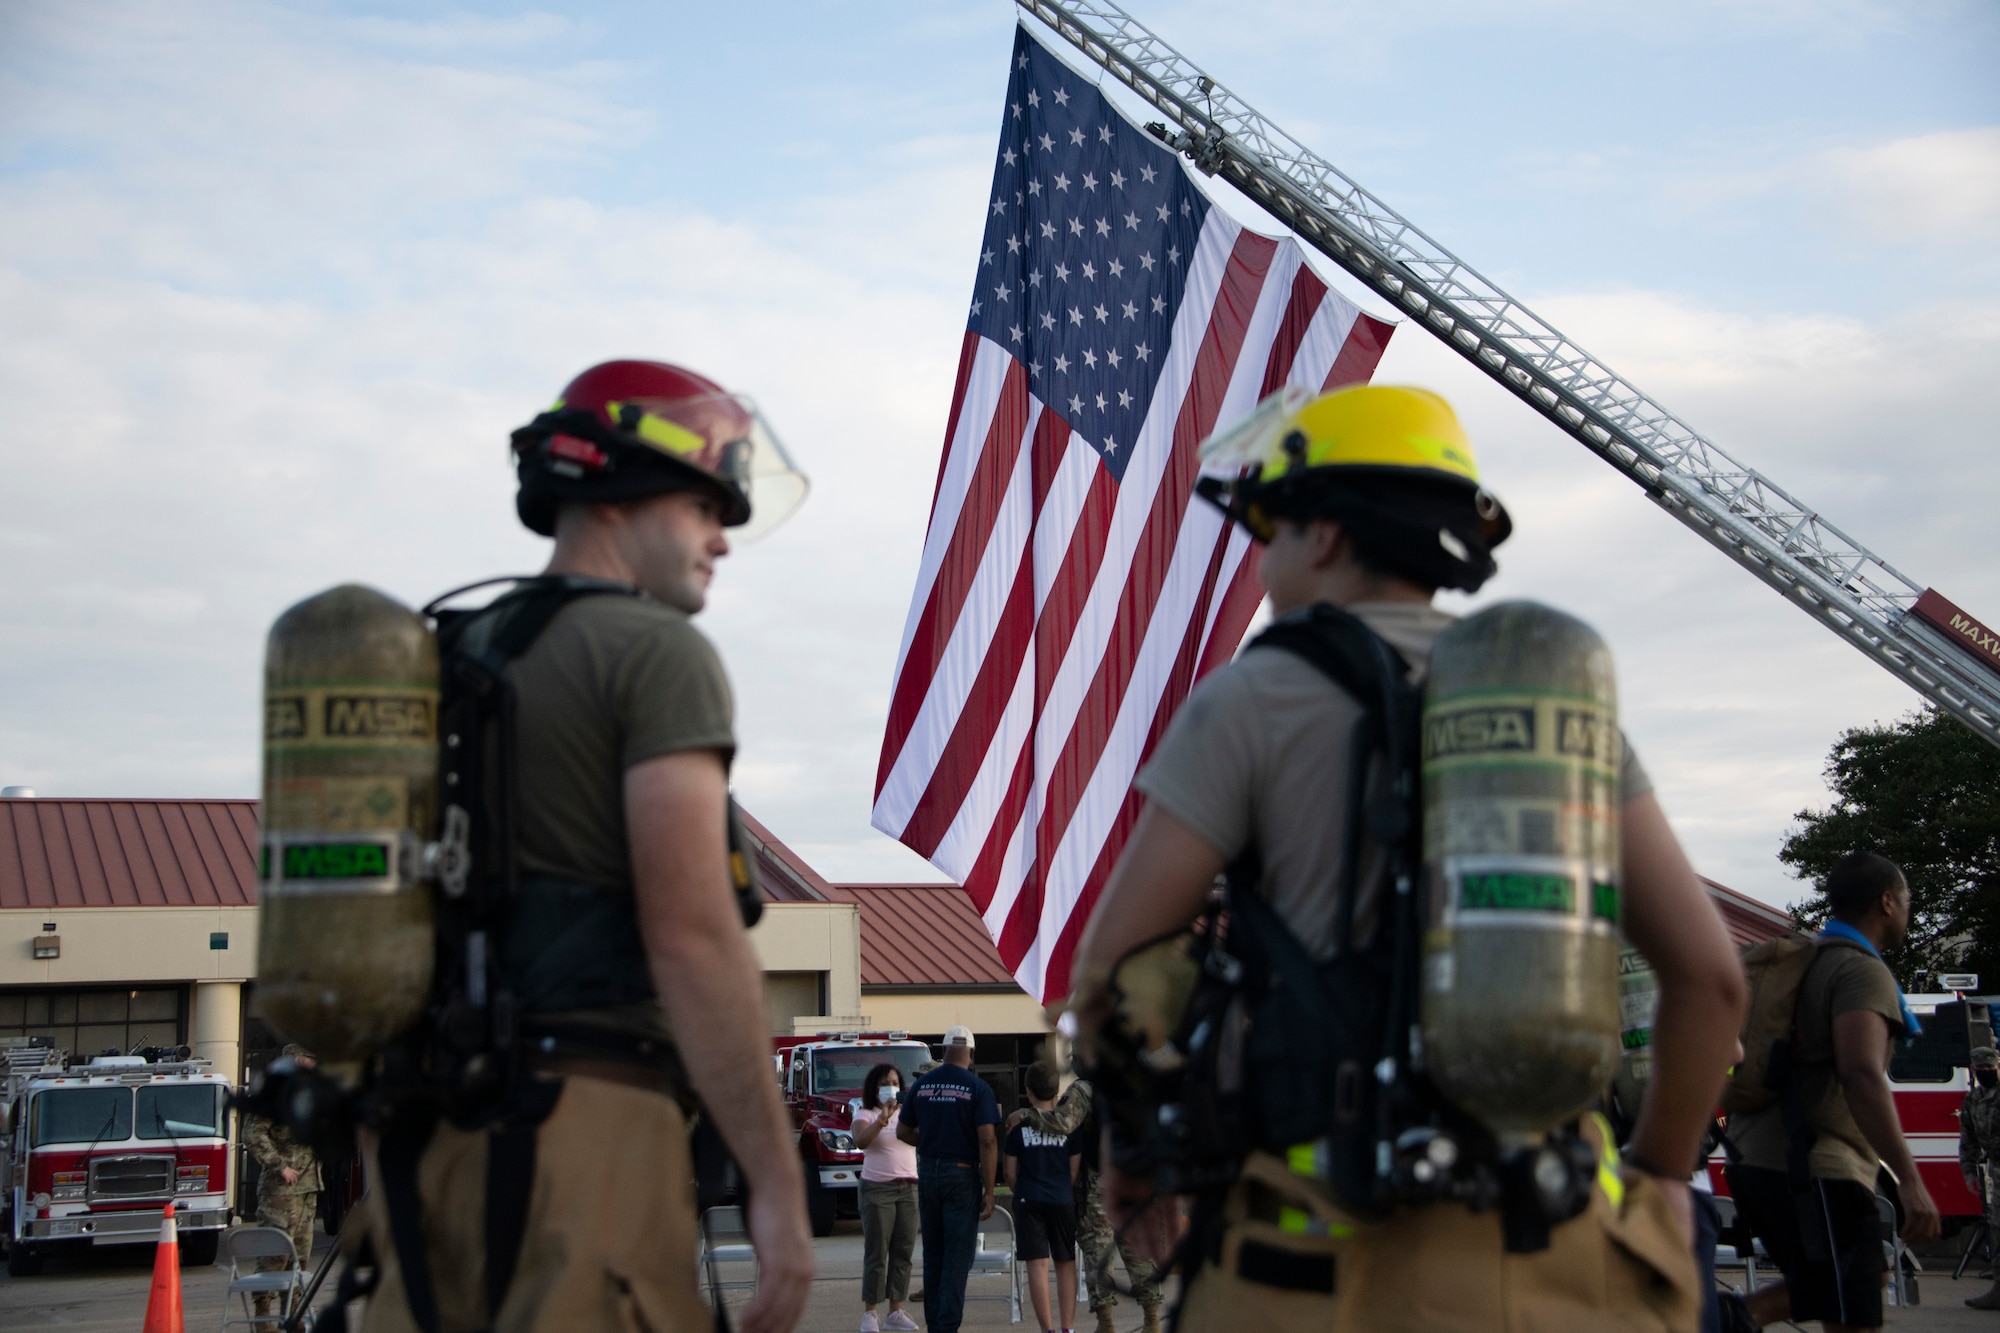 Firefighters from the 42nd Air Base Wing attend a 9/11 remembrance ceremony, Sept. 11, 2020, on Maxwell Air Force Base, Alabama. Prior to the ceremony, members from the Maxwell-Gunter community participated in a 2.72 mile ruck march. (U.S. Air Force photo by Airman 1st Class Jackson Manske)